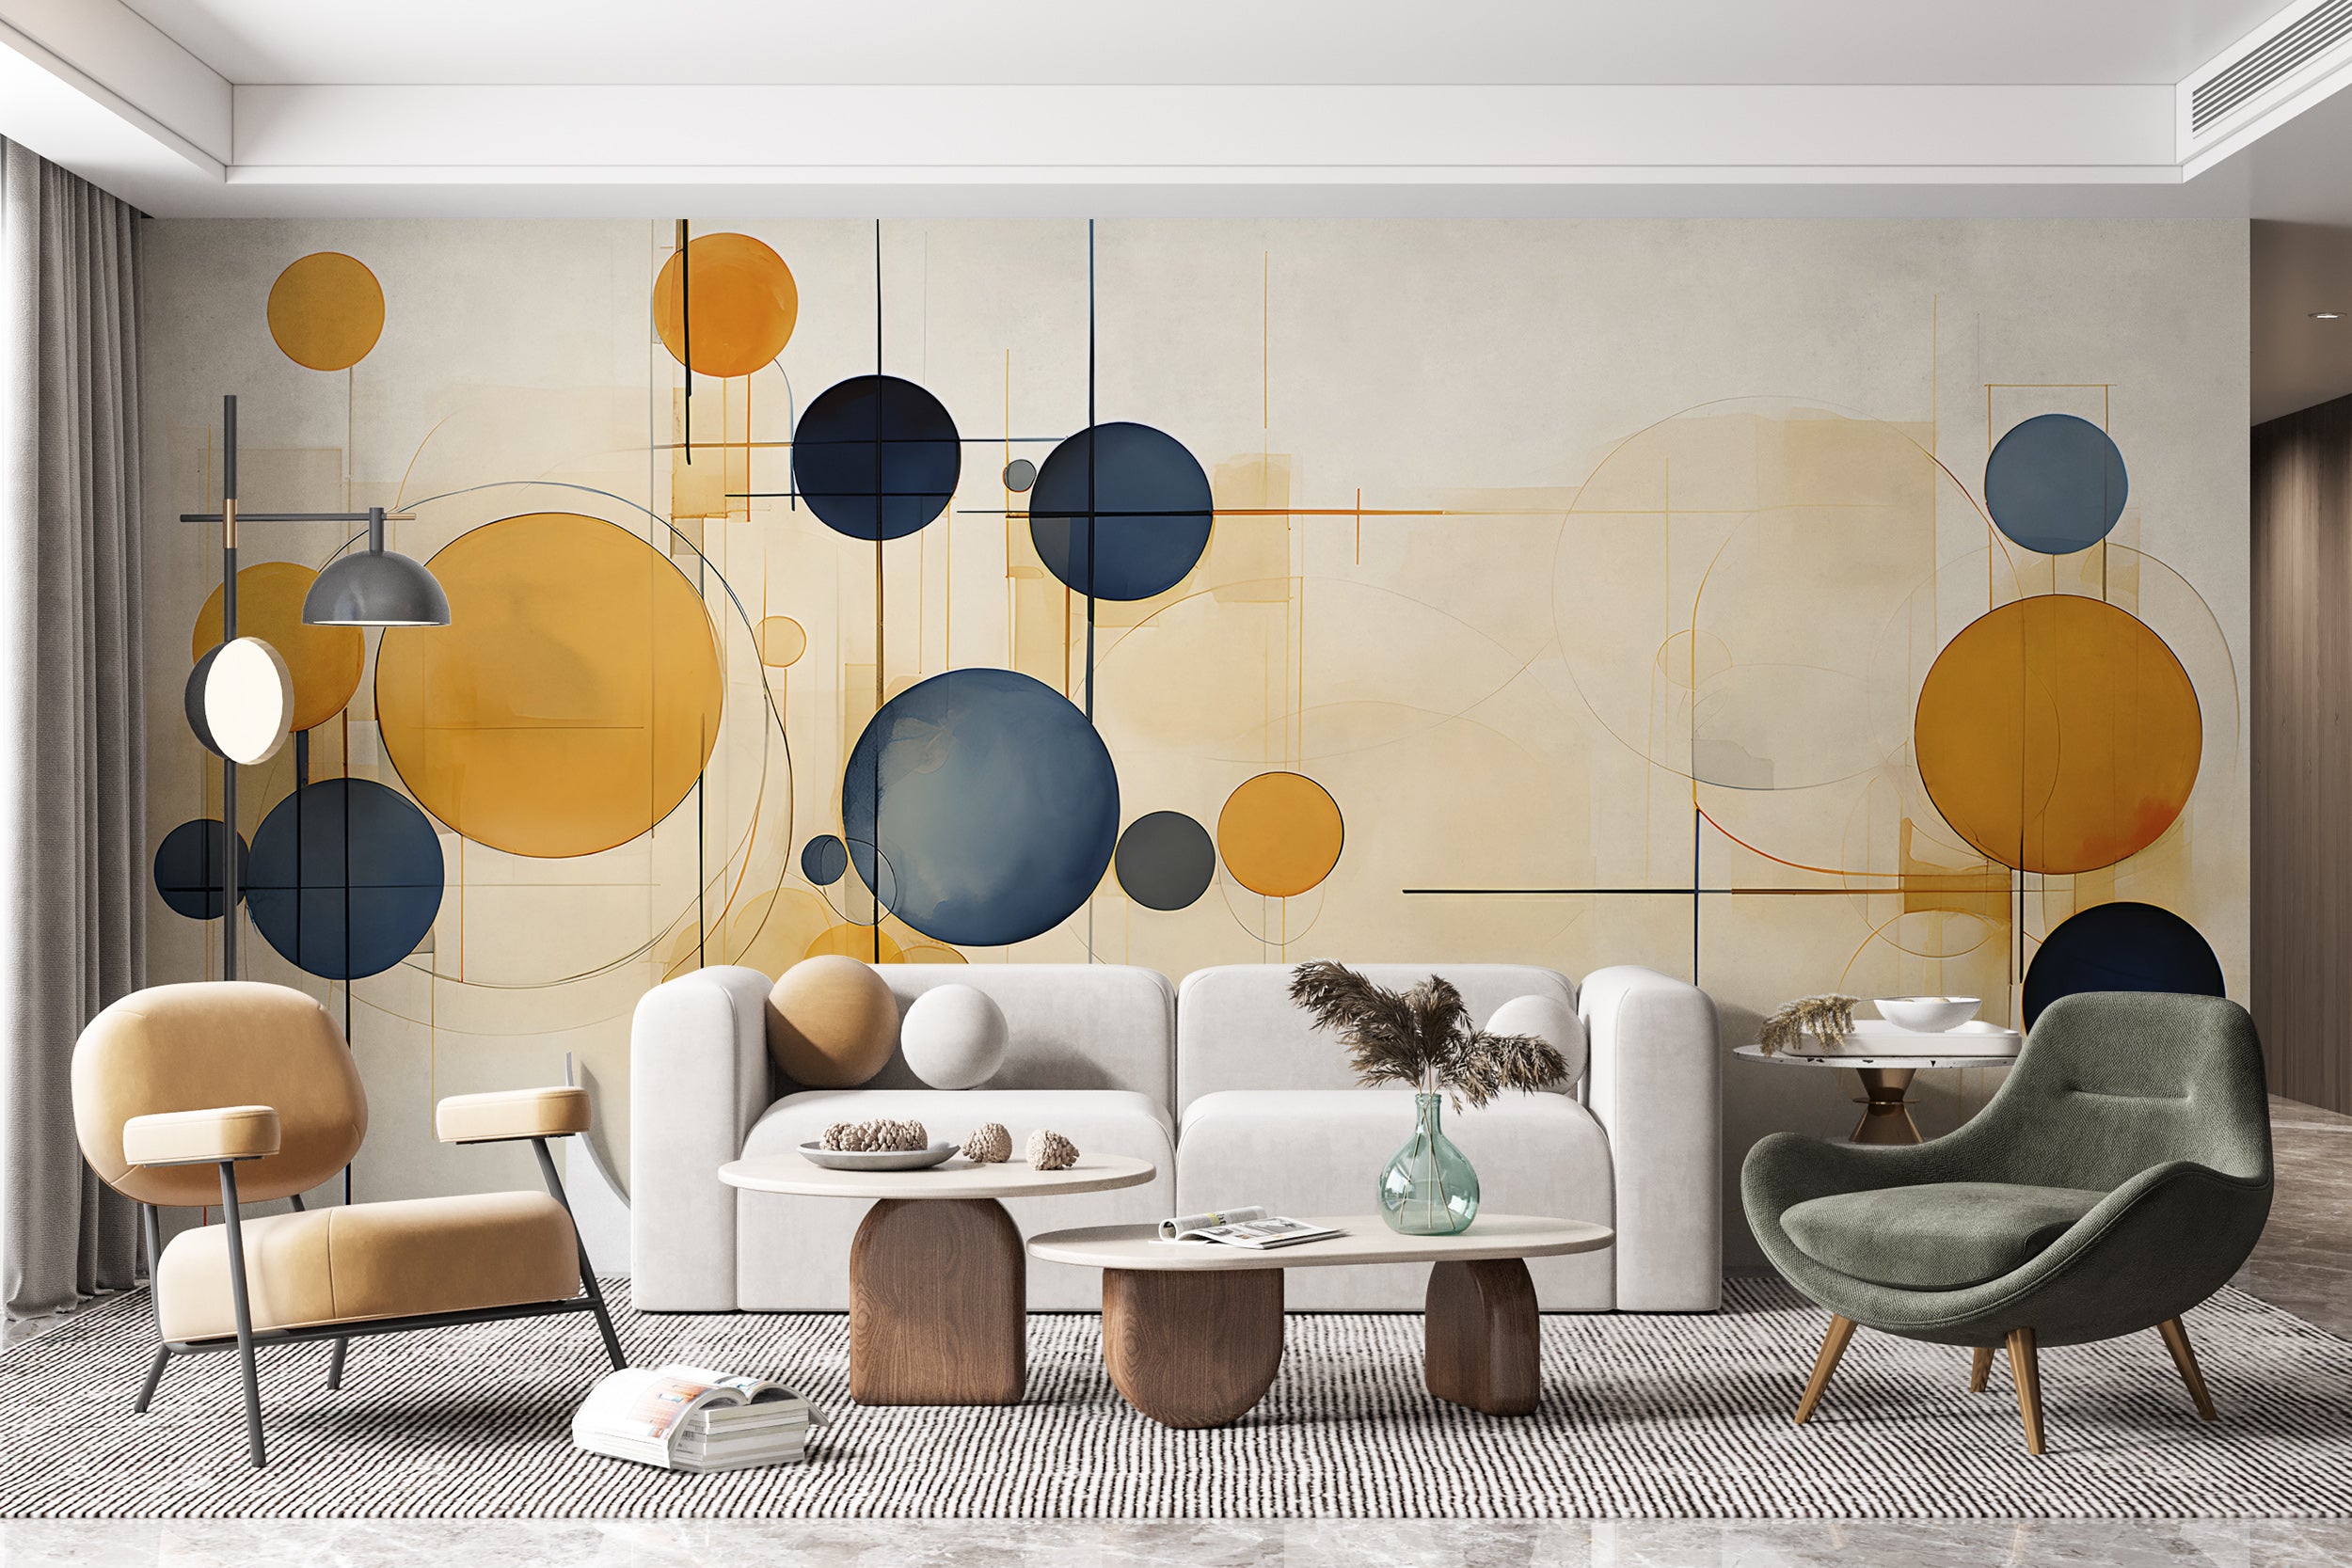 Contemporary Geometric Art in Room Setting